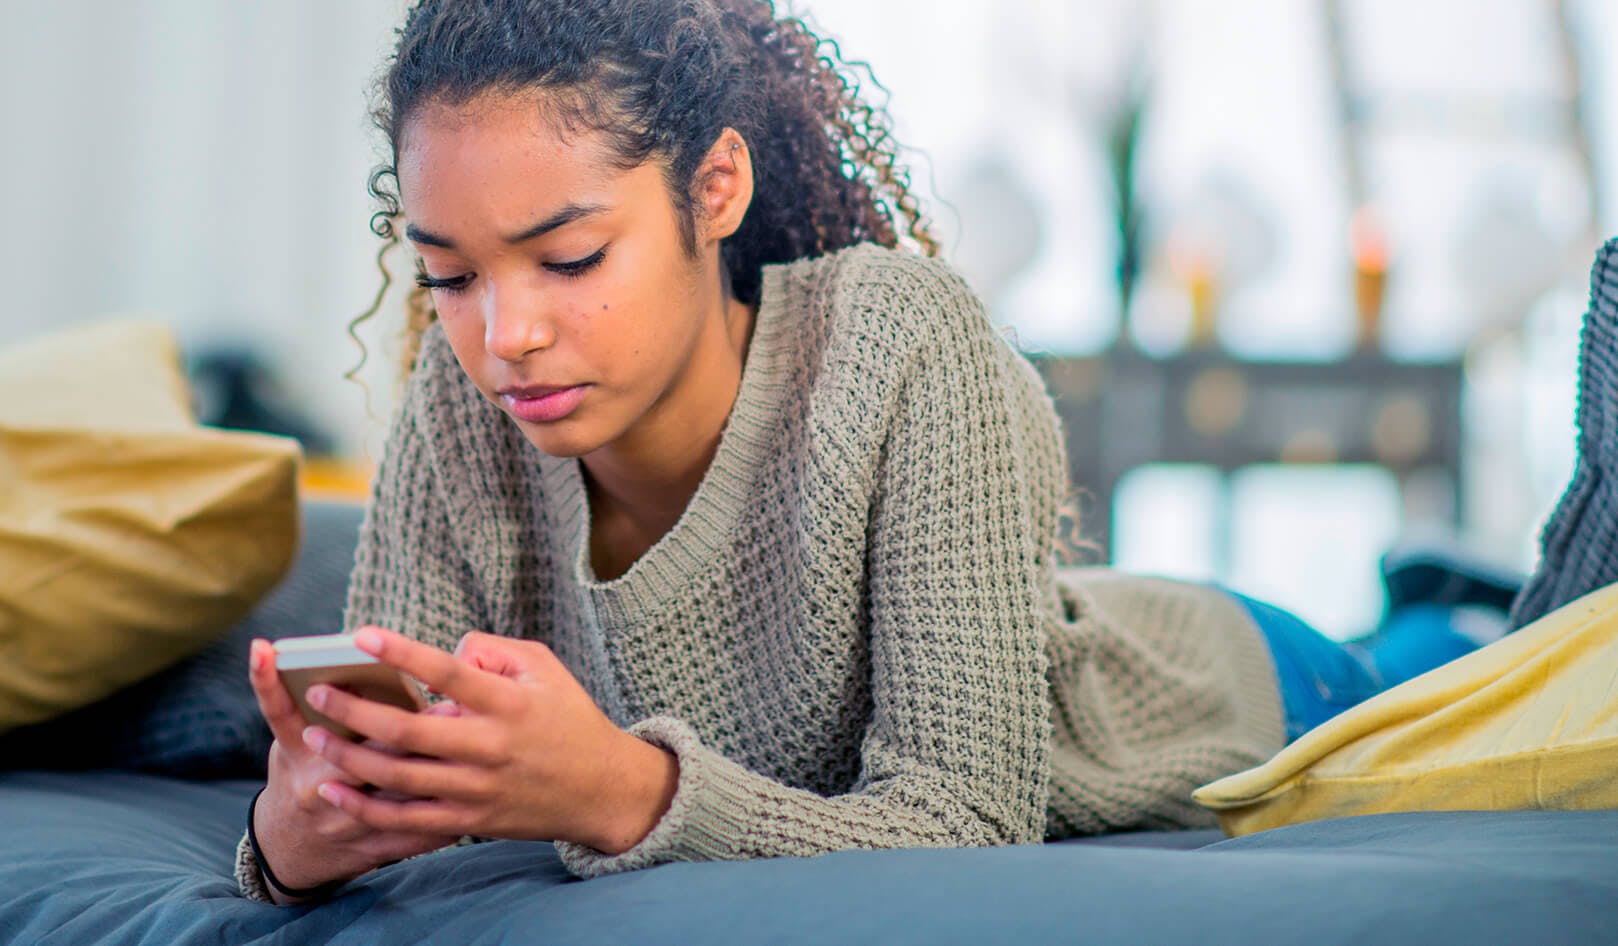 How Dangerous is Sexting for Kids? - Qustodio